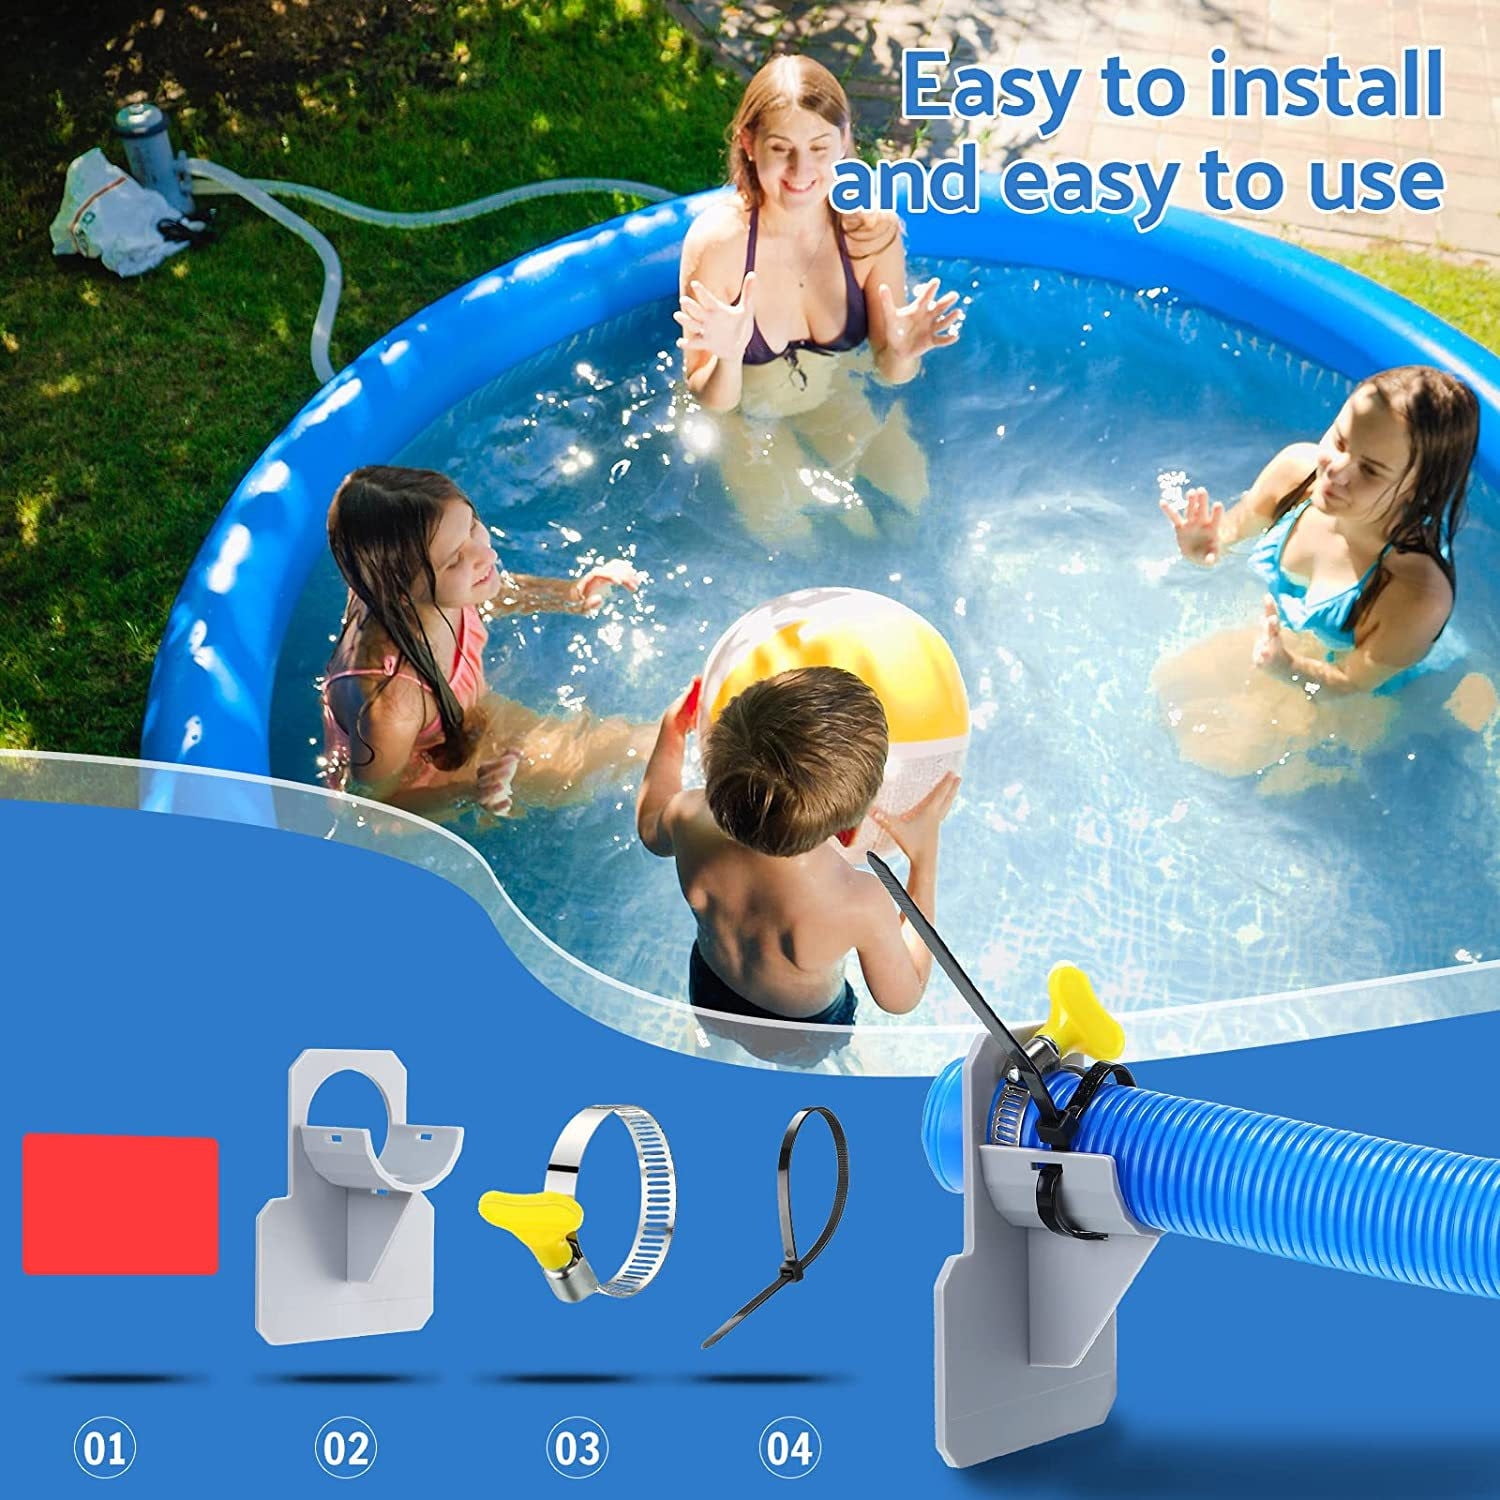 2PCS Swimming Pool Pipe Holders,Above Ground Pool Accessories,Swimming Accessories,Pool Hoses For Above Ground Pools,Preventing Sagging Accessory for Swimming Pool Clearance - Walmart.com